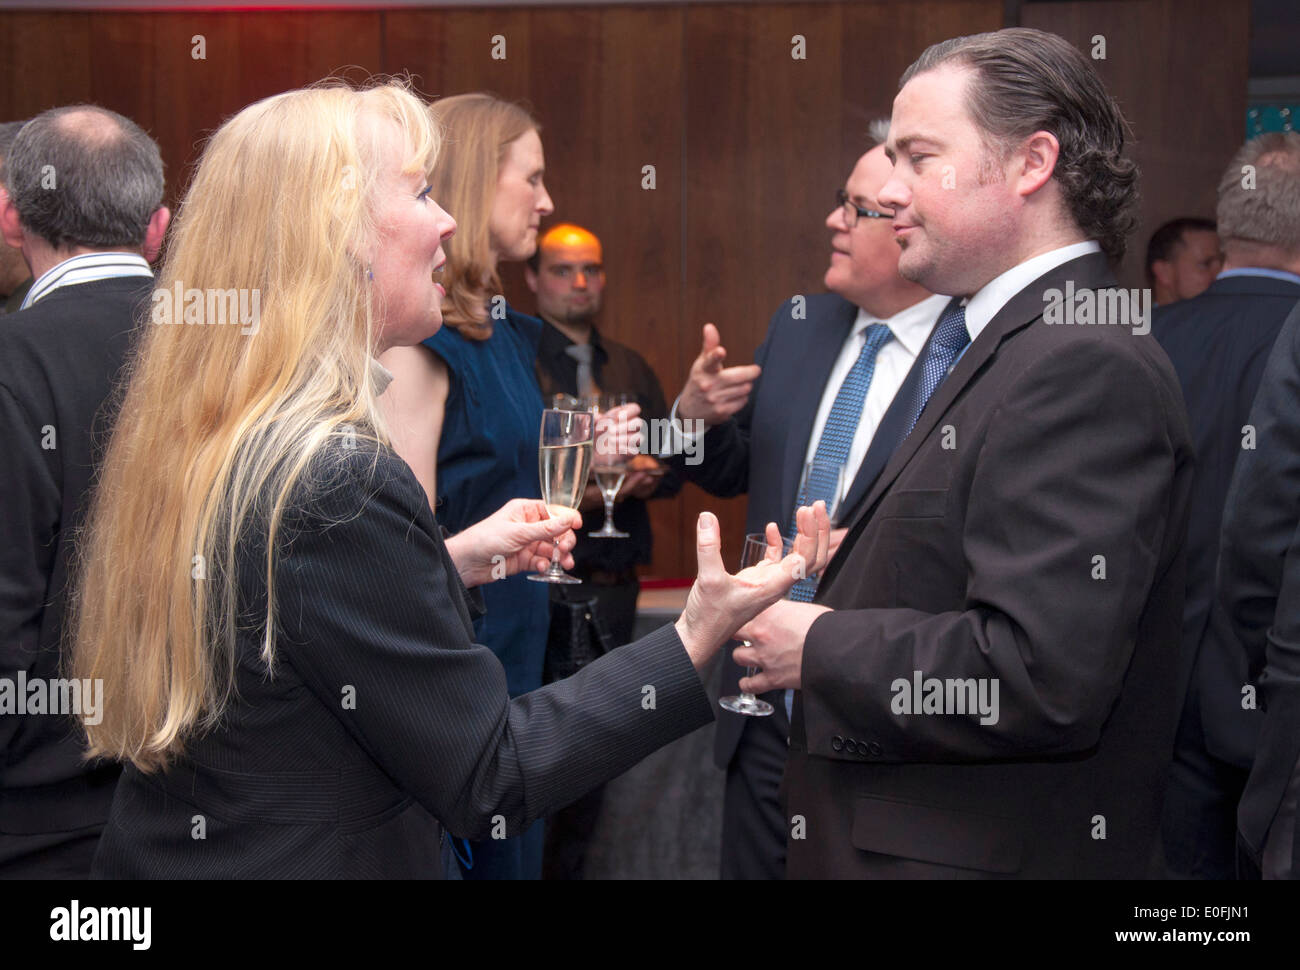 Men and women talking networking at a business conference social event Stock Photo